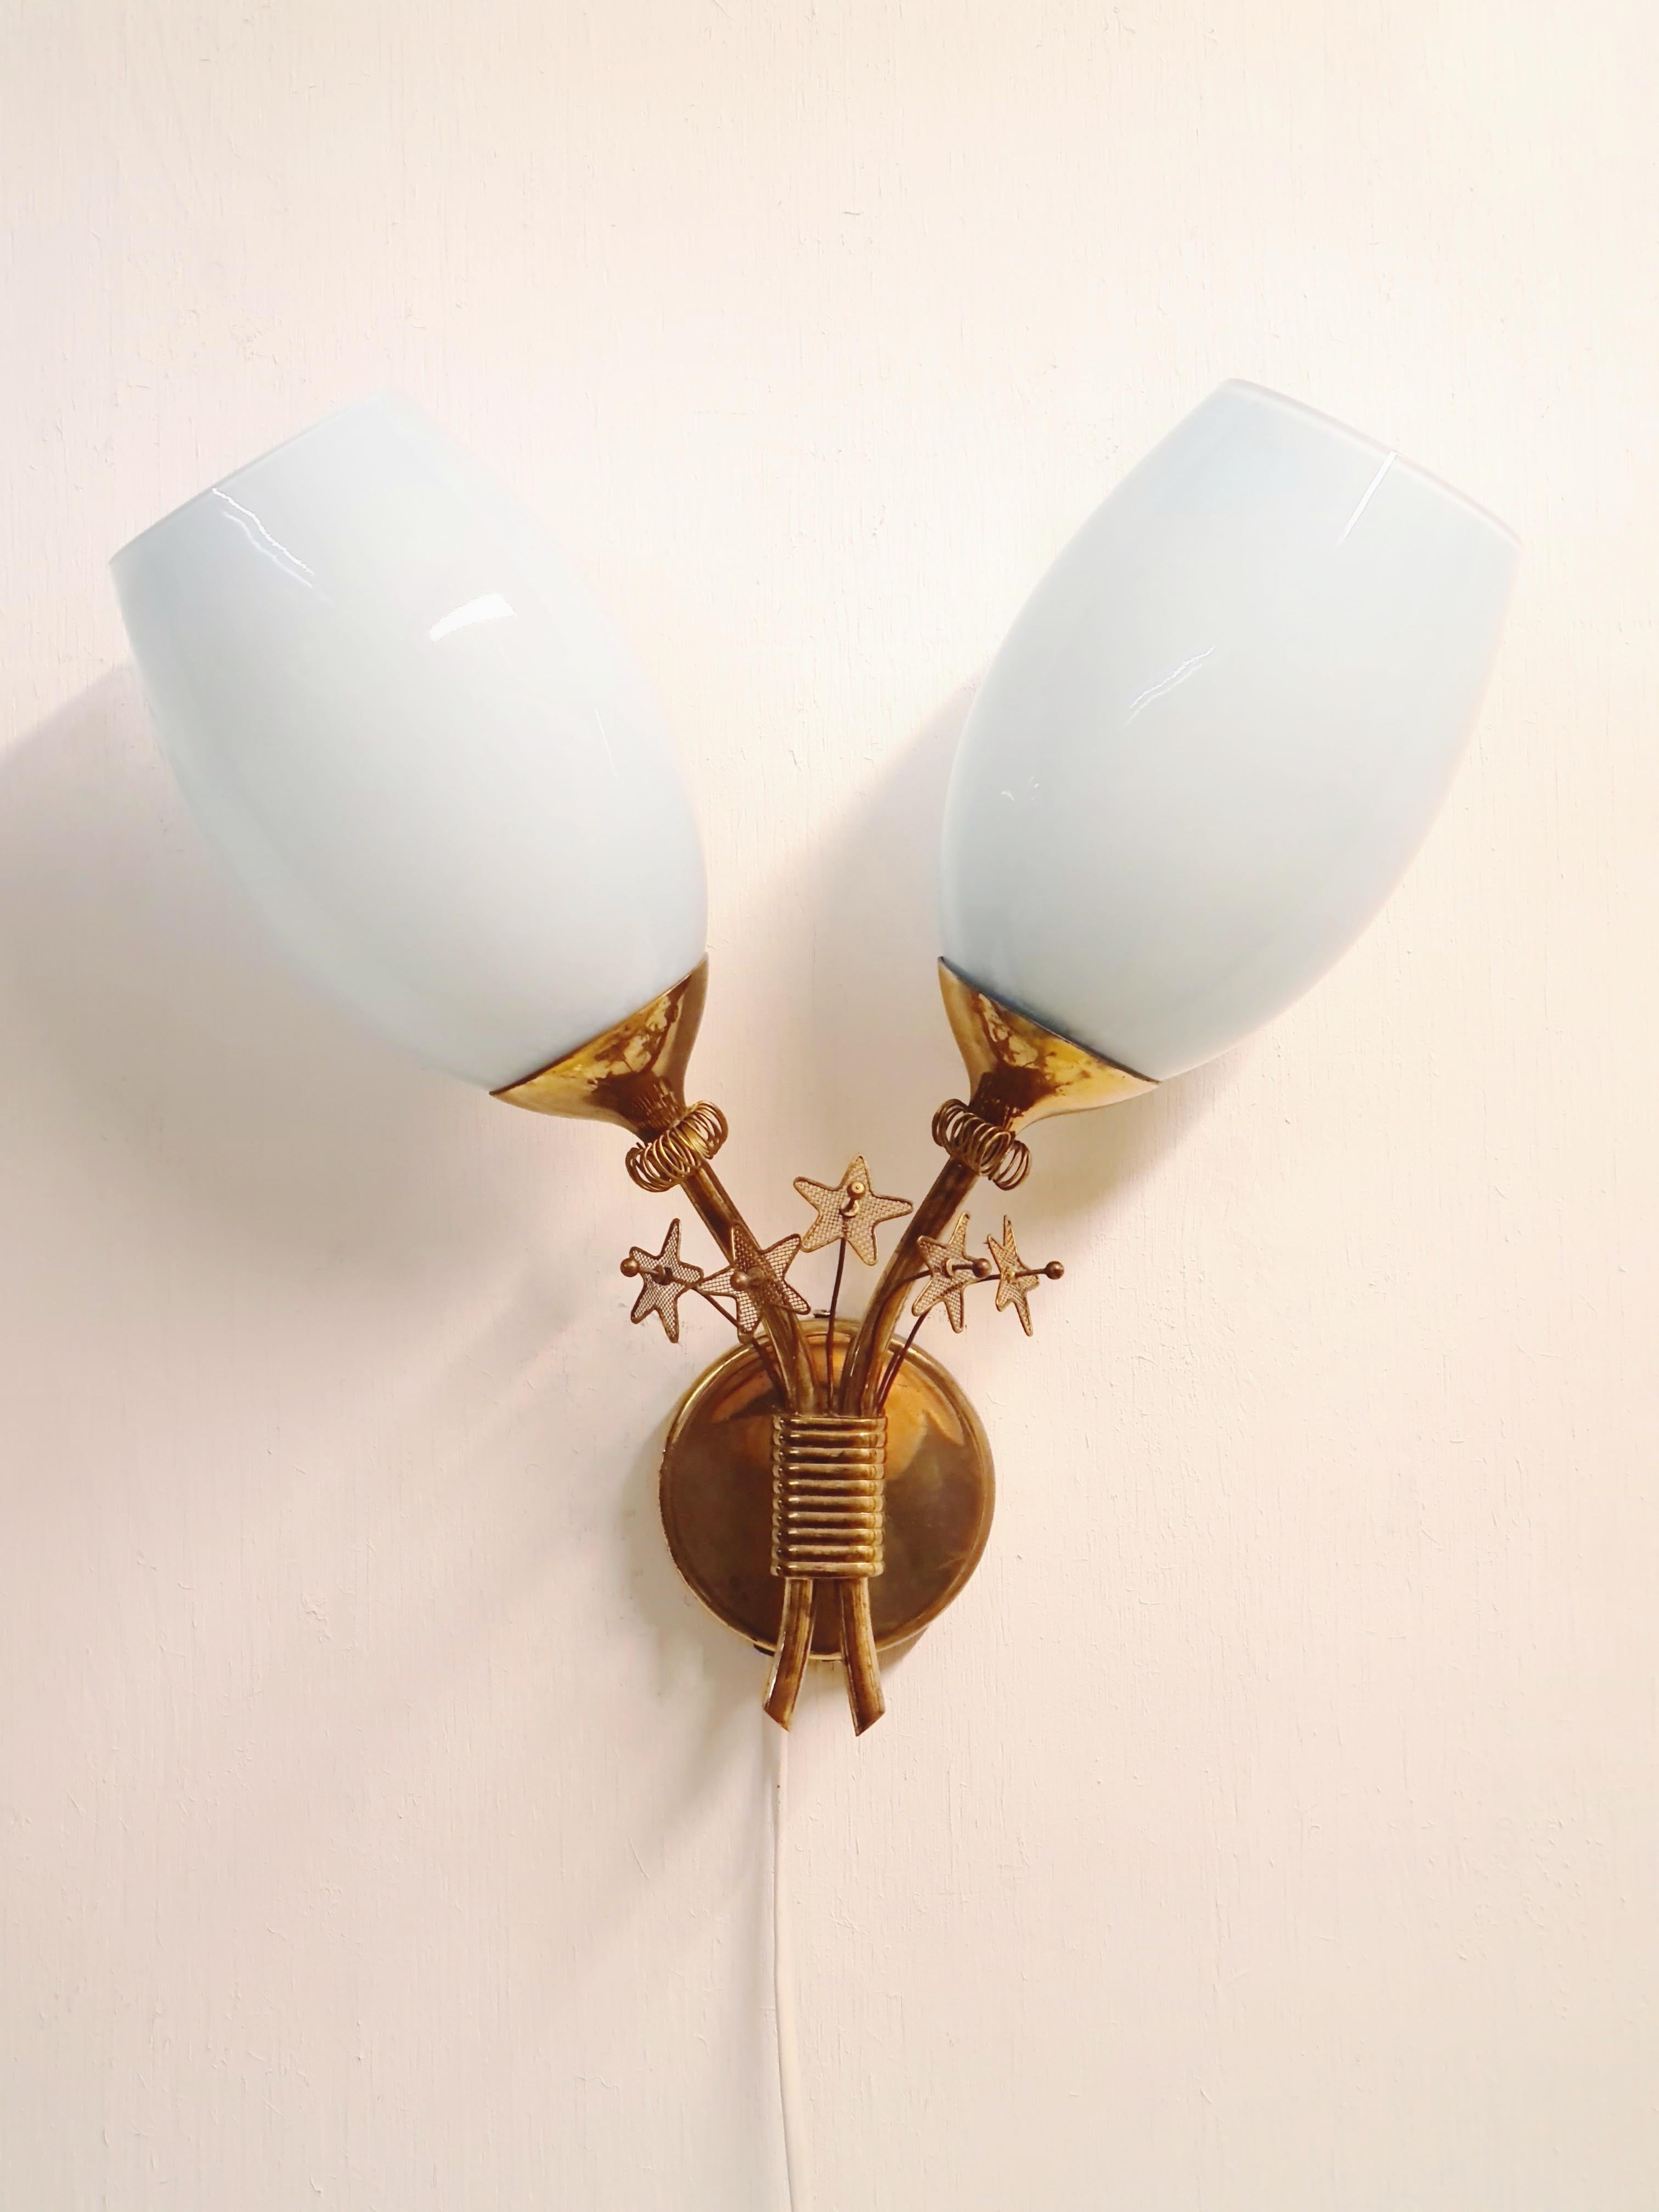 Scandinavian Modern Rare Paavo Tynell Wall Lamp, Taito Oy 1950s For Sale